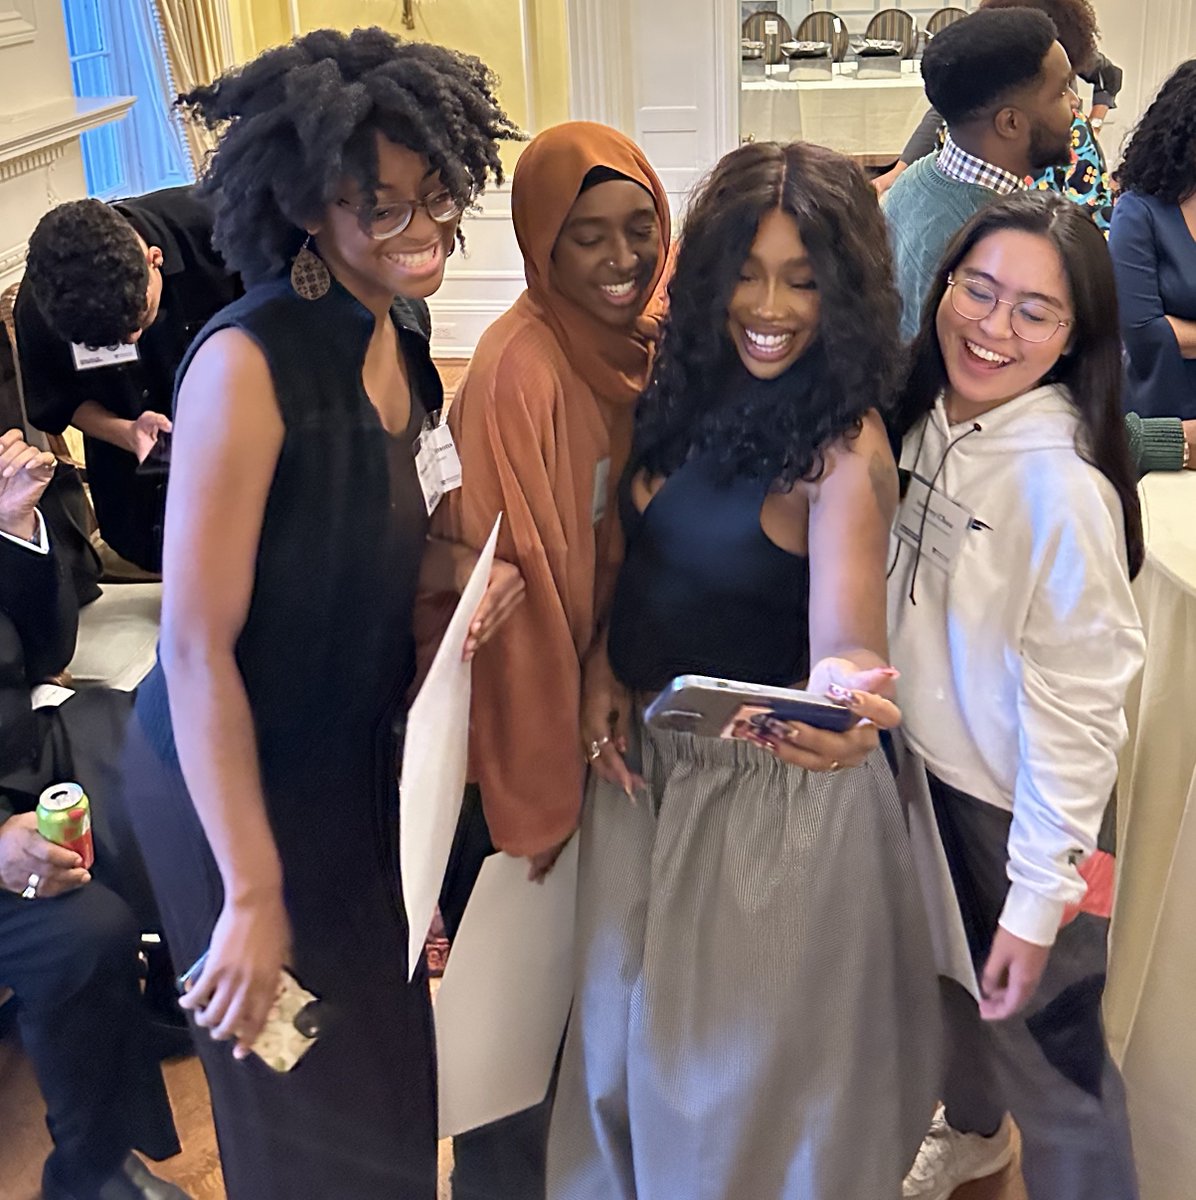 Sza took time to connect with everyone. Look at her with our students. 💘💘💘 @PrincetonEFF @Princeton